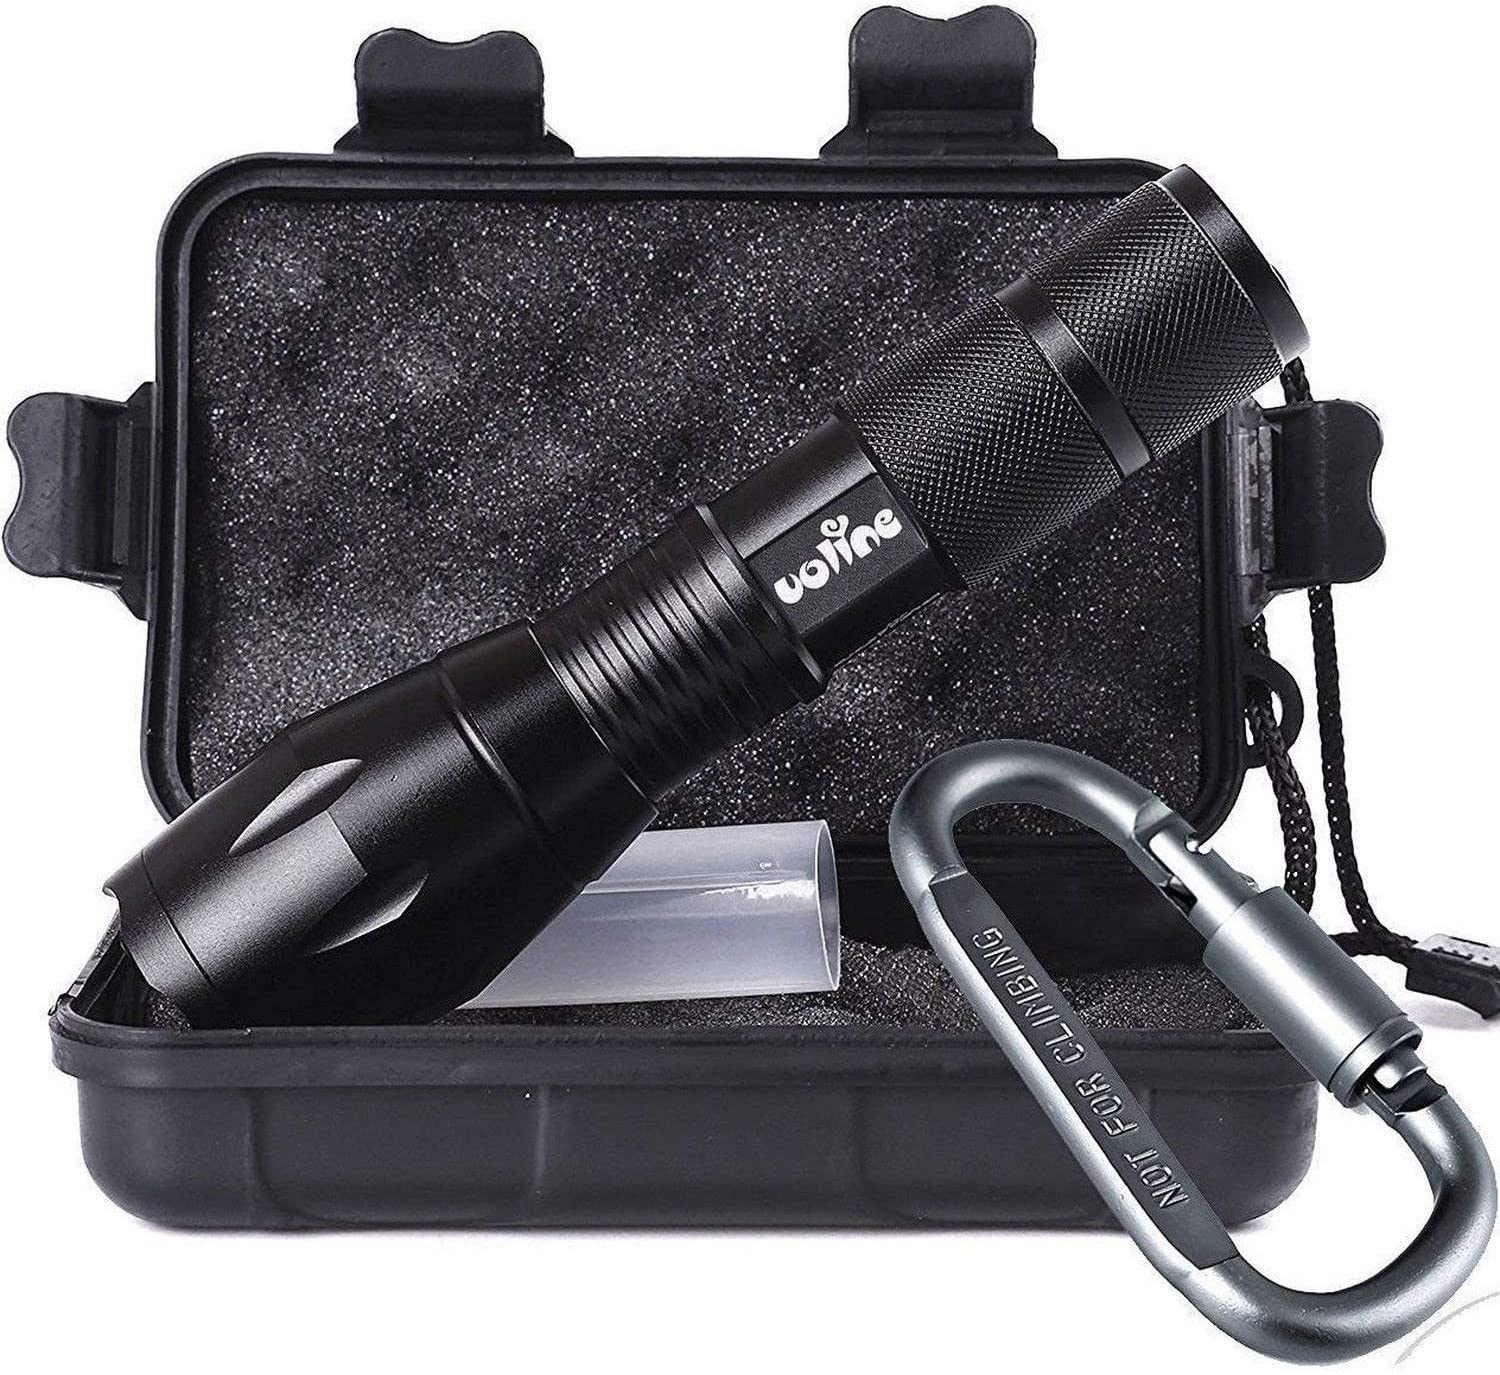 Tactical Portable LED Flashlight with High Lumens – Just $13.99 at Amazon